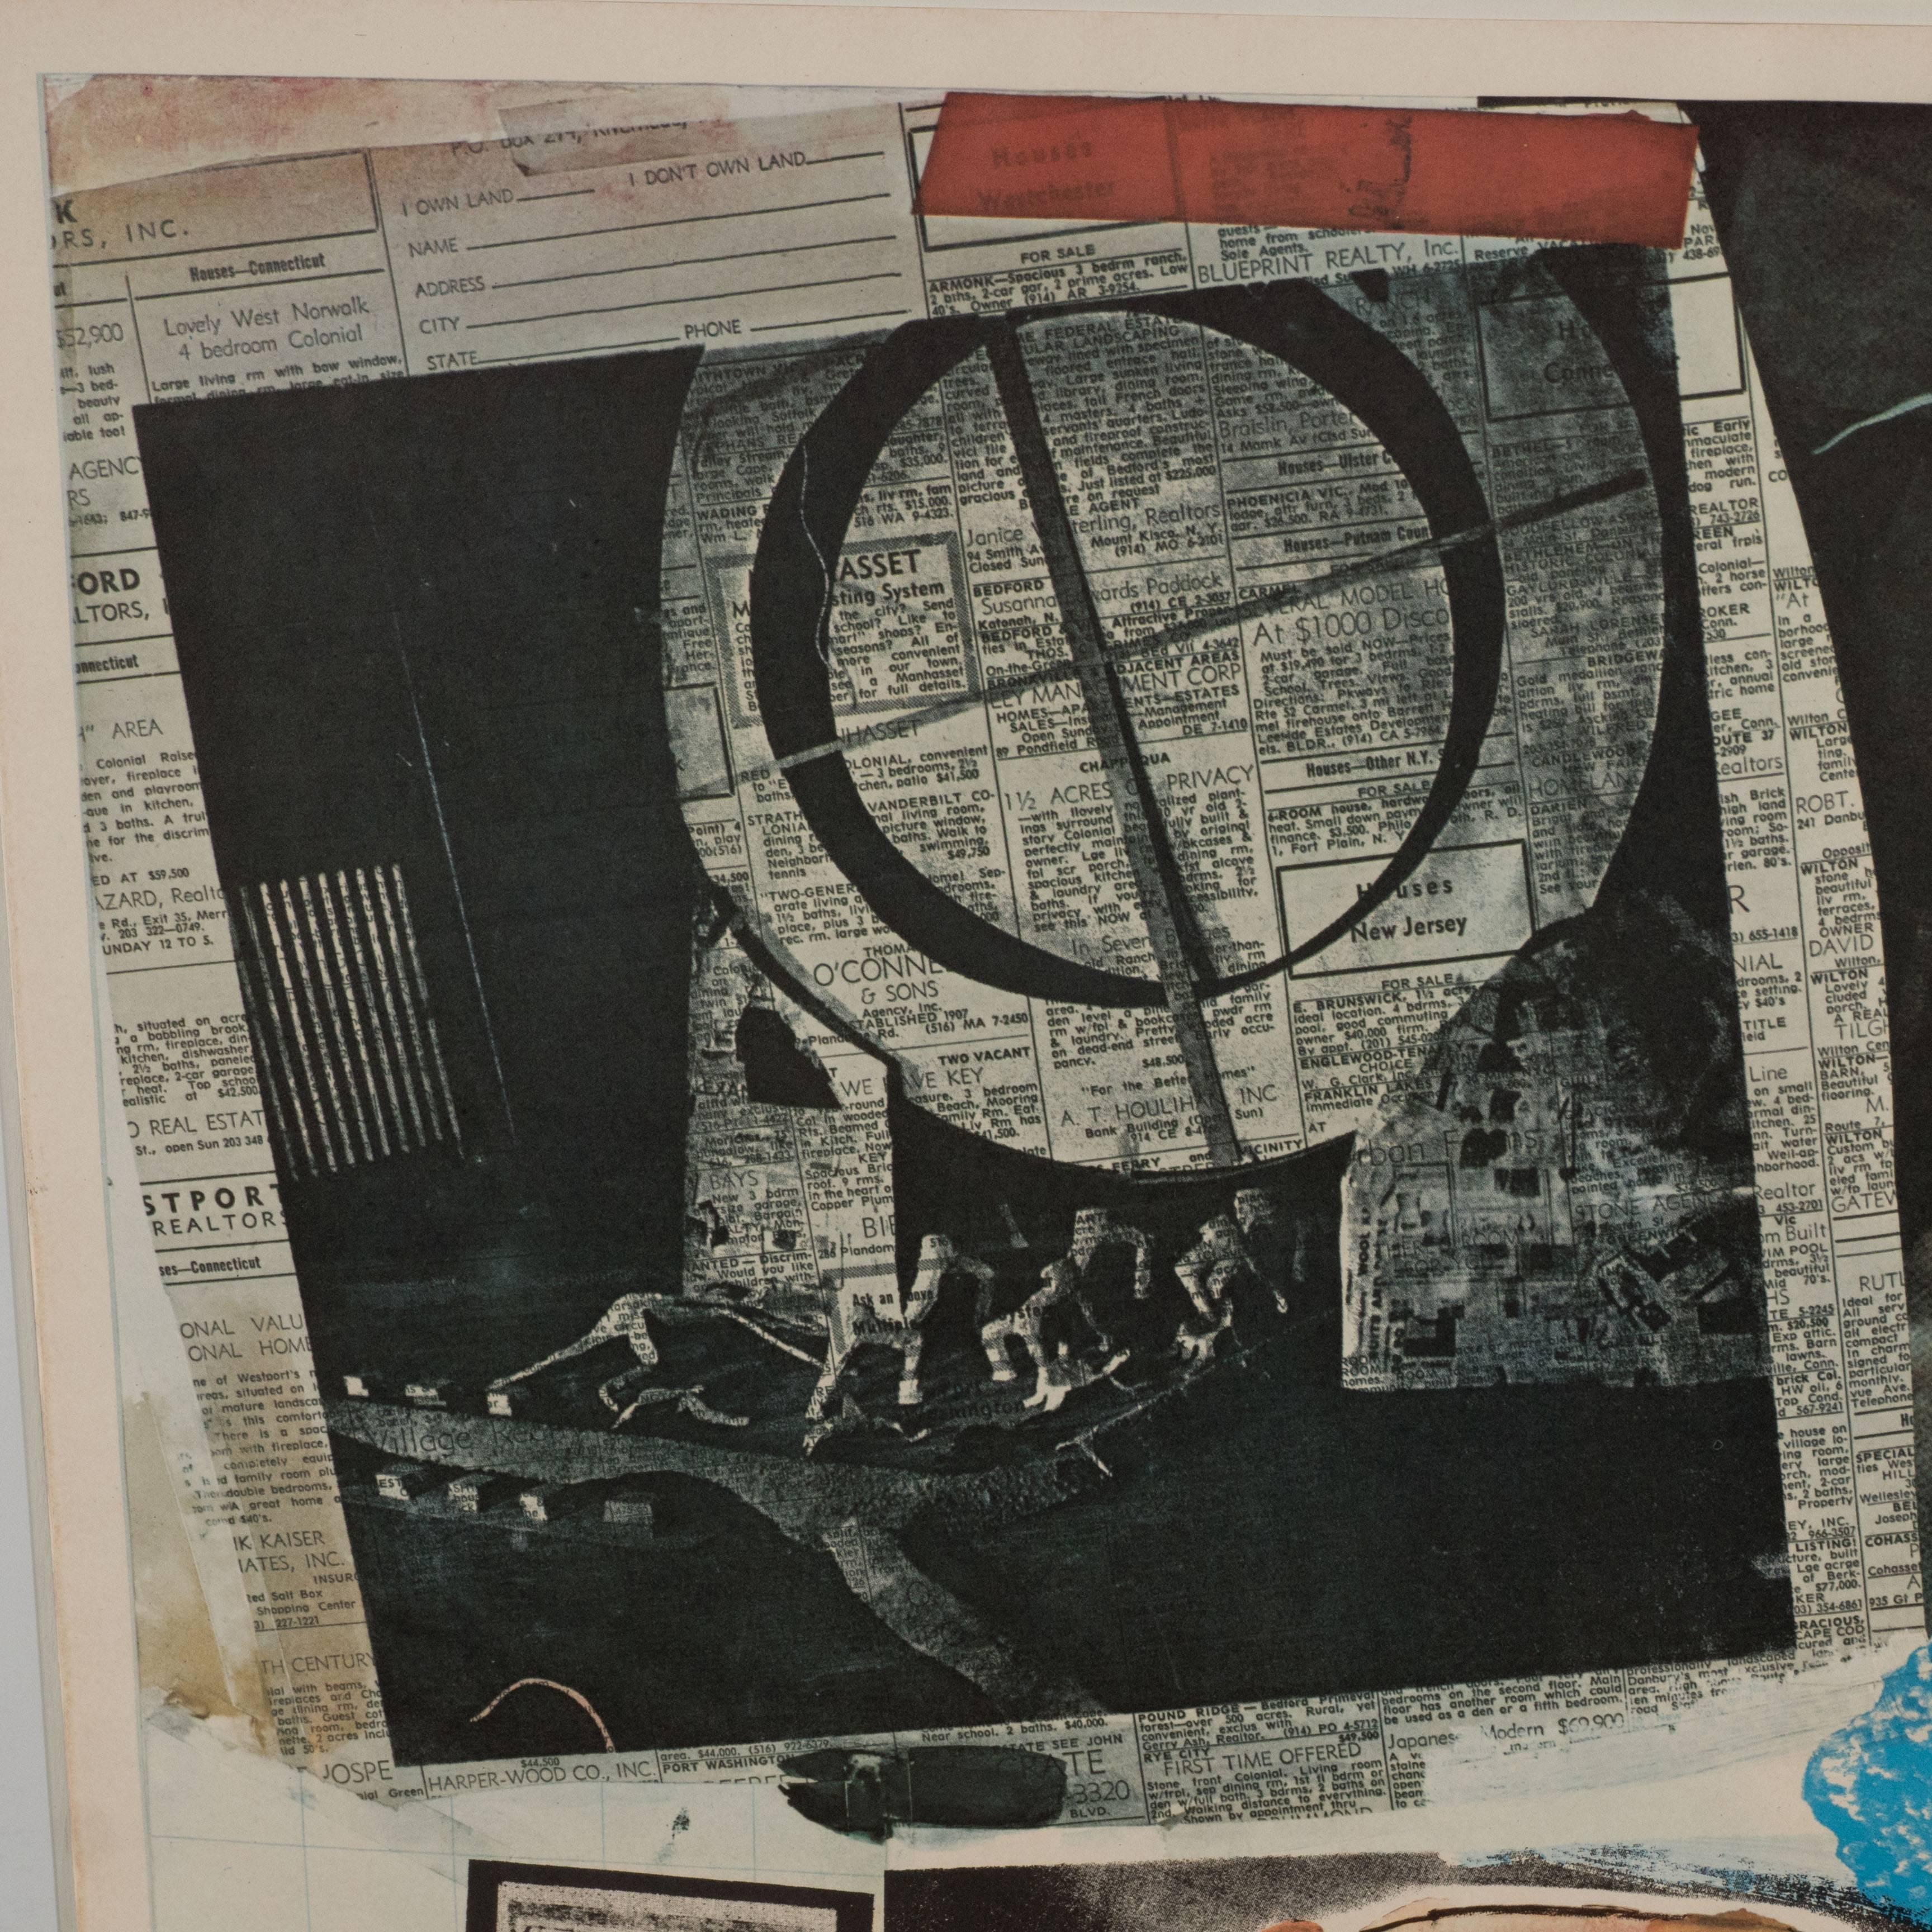 Painted Robert Rauschenberg Lithograph Homage to Kiesler Print, 1967